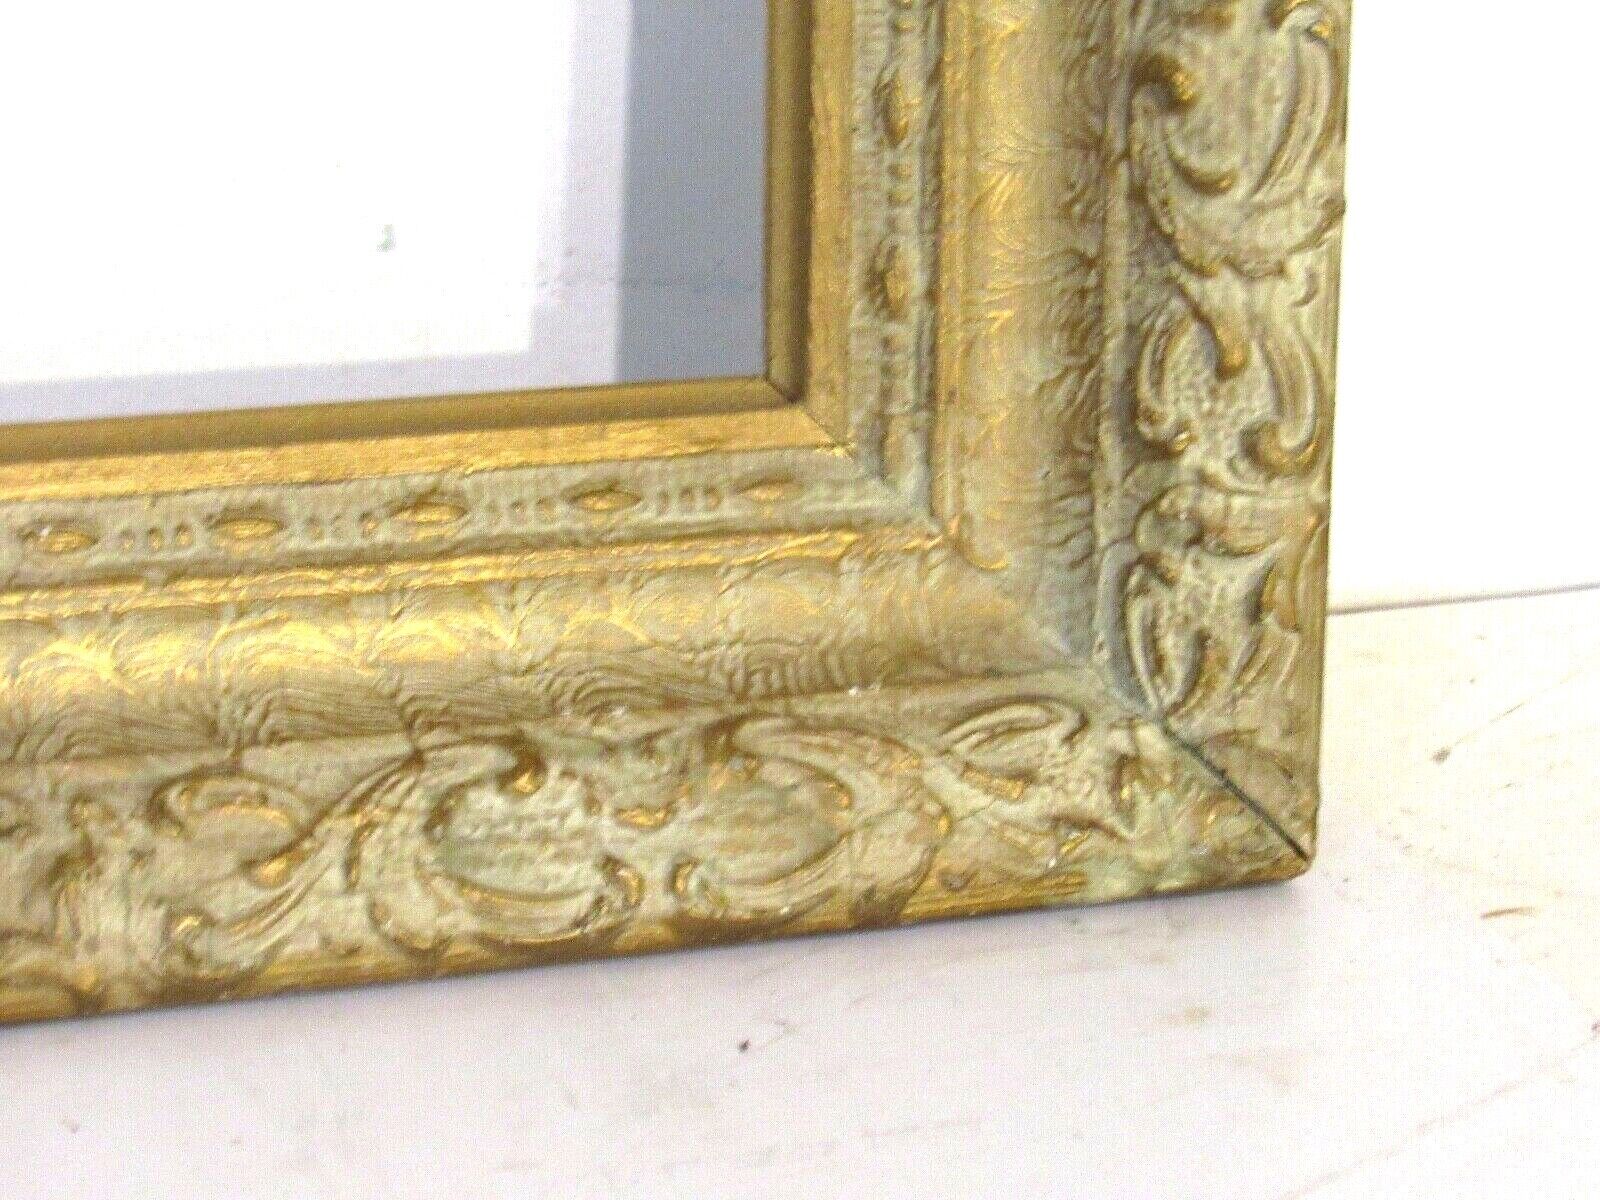 VINTAGE WHITEWASH GILDED  CARVED FRAME FOR PAINTING  19  X 15 INCH  (e-42)